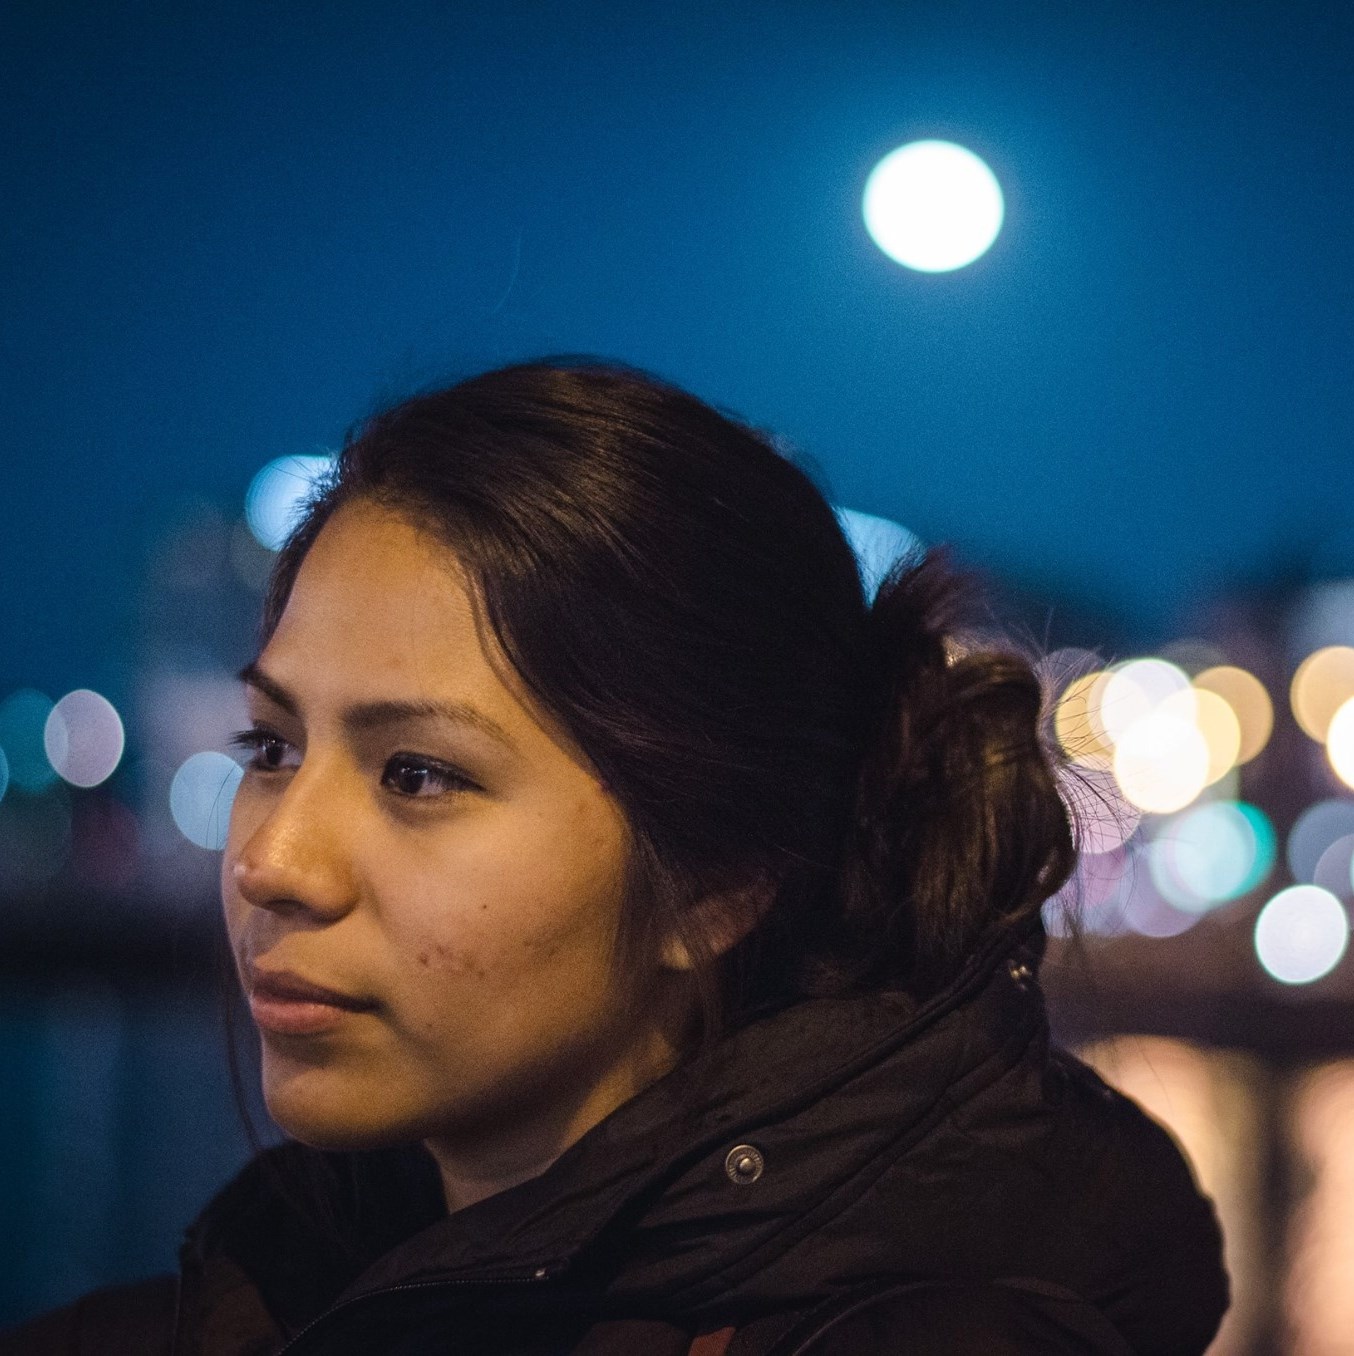 PHOTO: Nohemi Gonzalez appears in this photo.